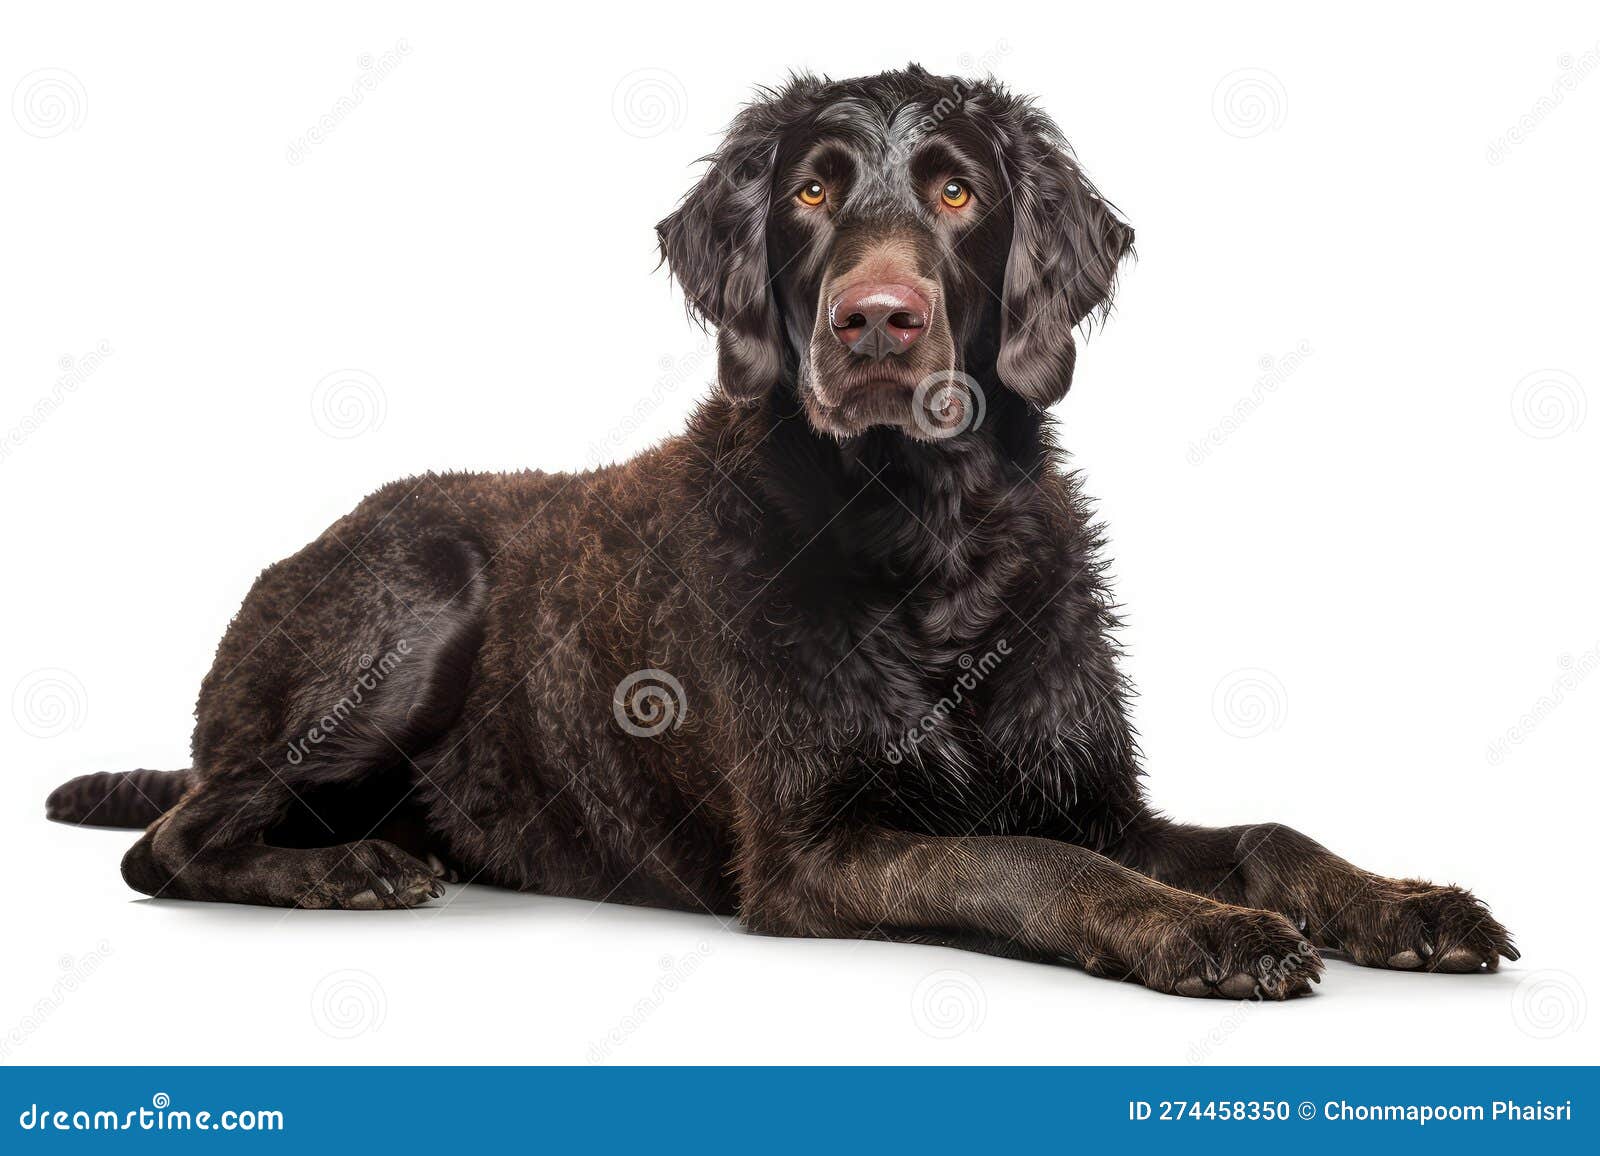 the most popular dog breeds worldwide in no particular order, isolate on white background.